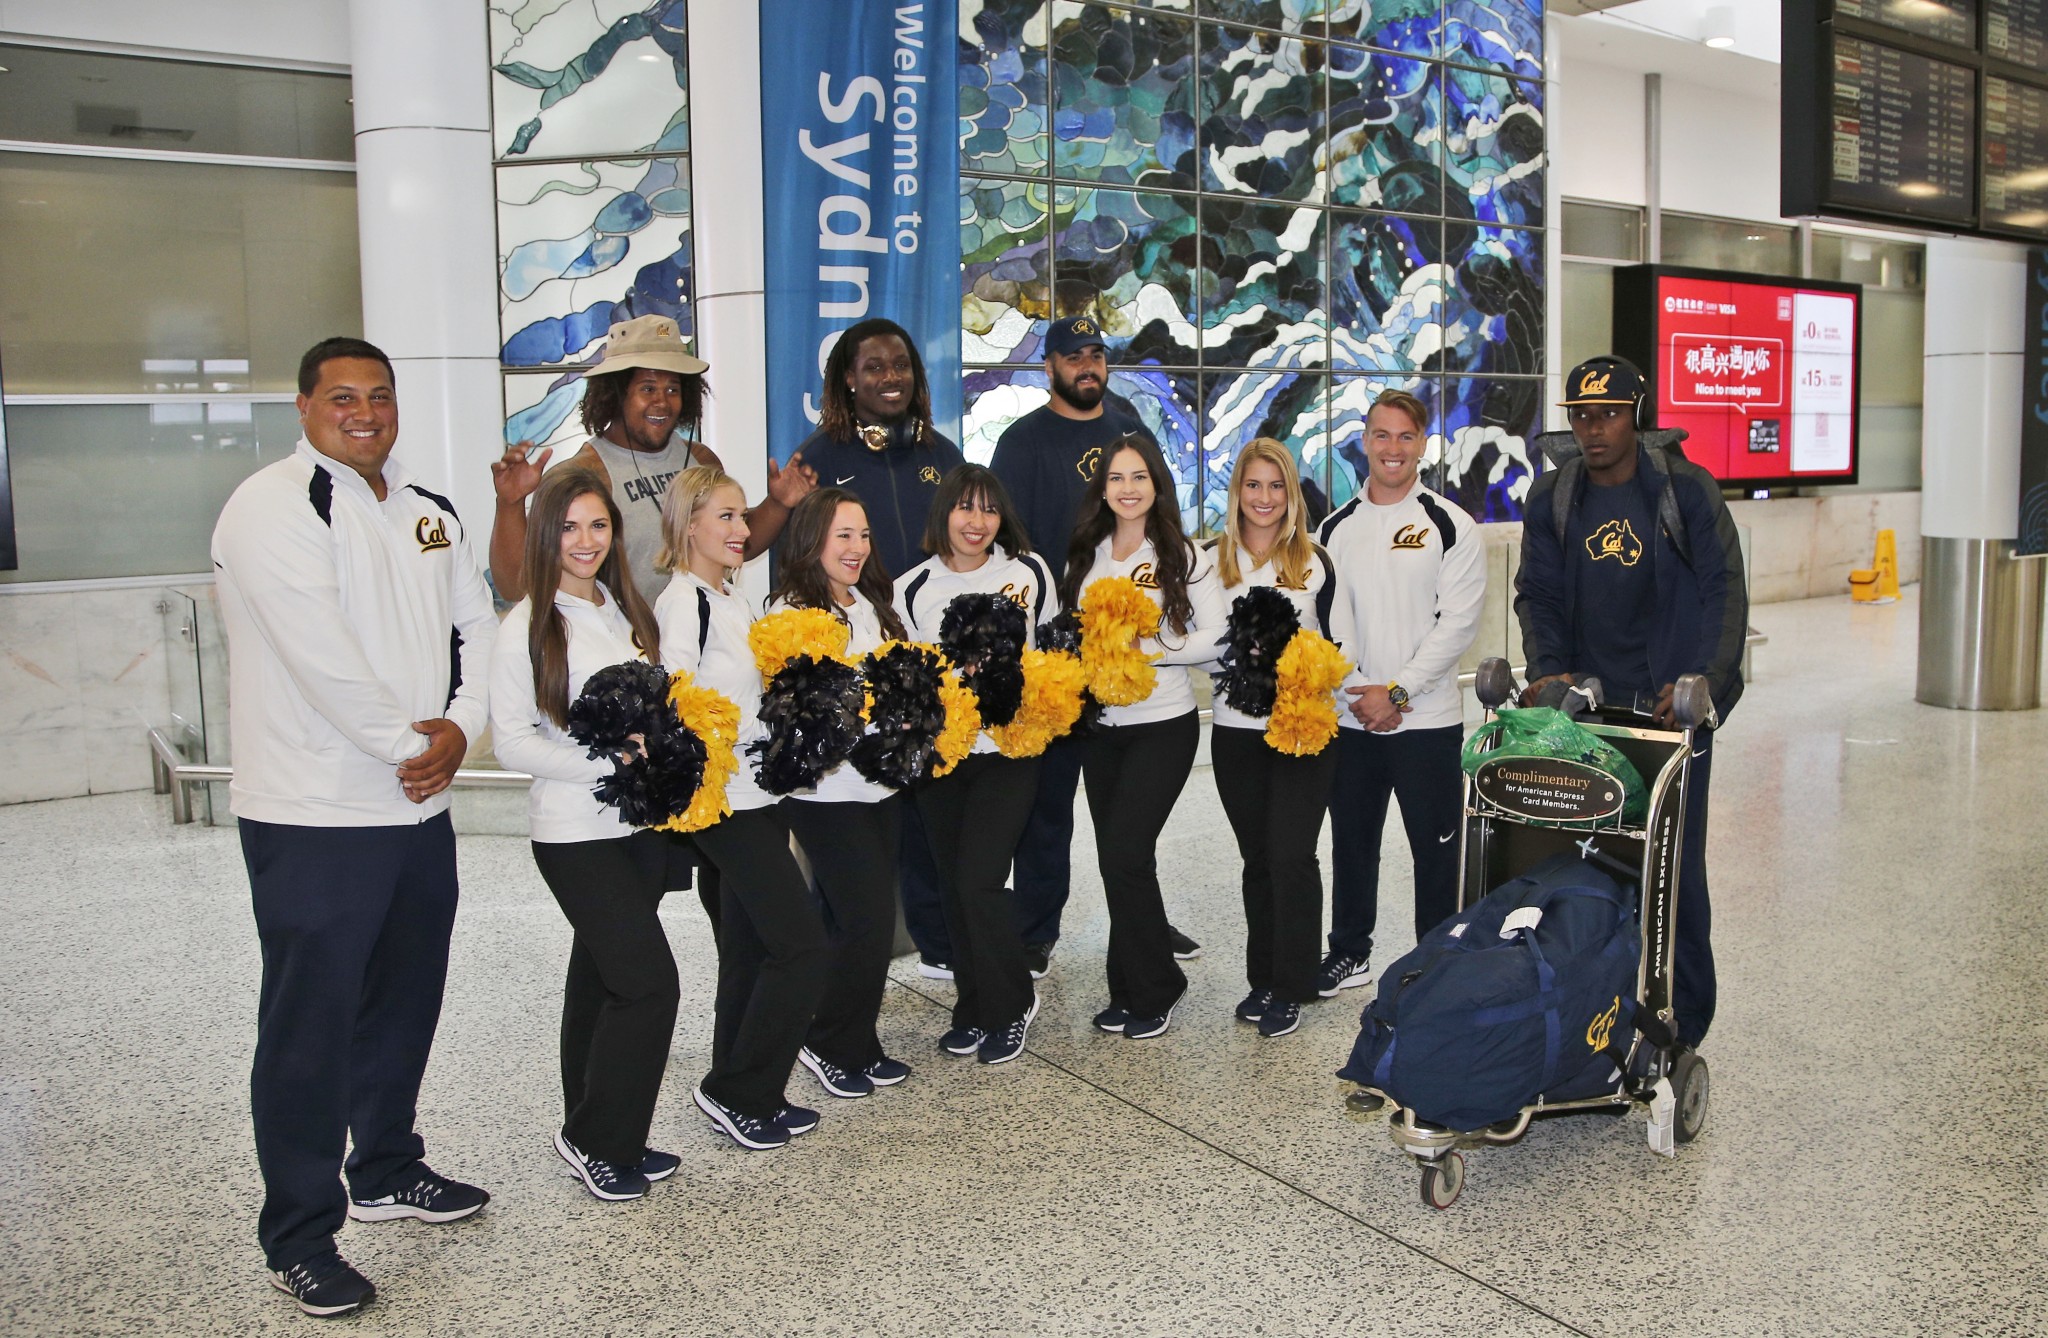 California Golden Bears cheerleaders welcome players as they arrive at Sydney International airport. (AP Photo/Rob Griffith)